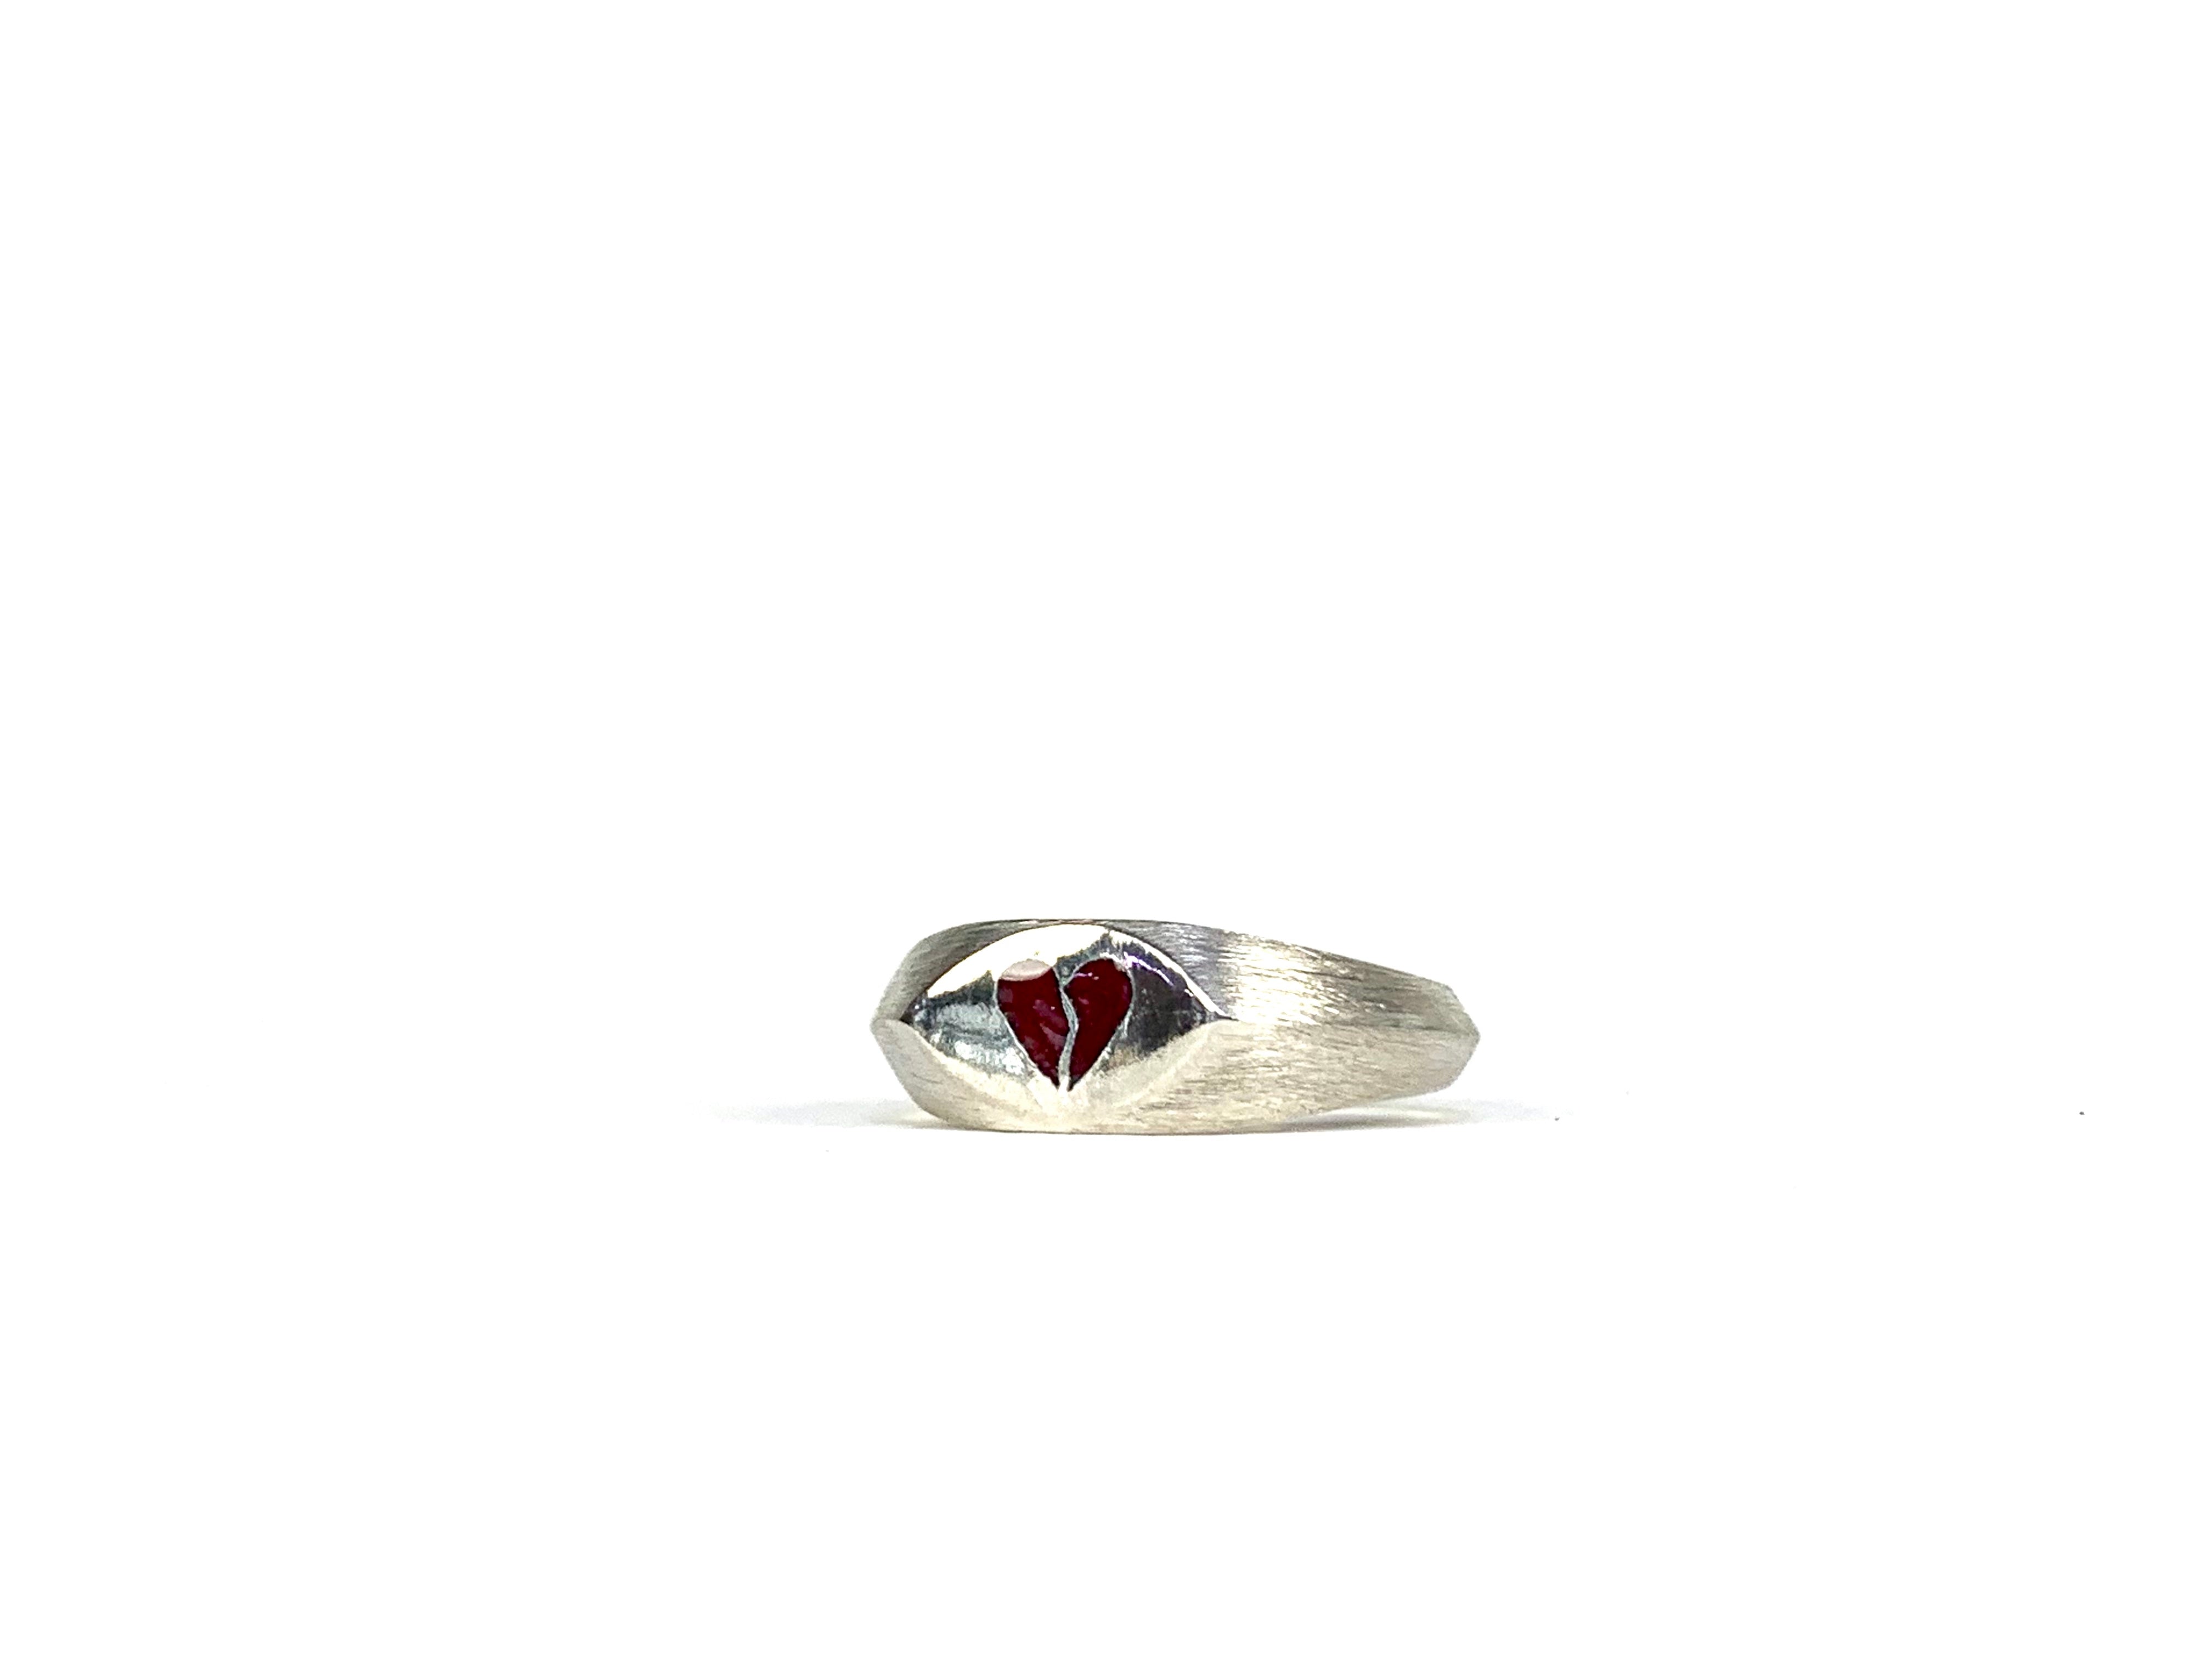 Broken heart ring **Available at Circle Craft in the Net Loft (1-1666 Johnston st Granville Island Vancouver